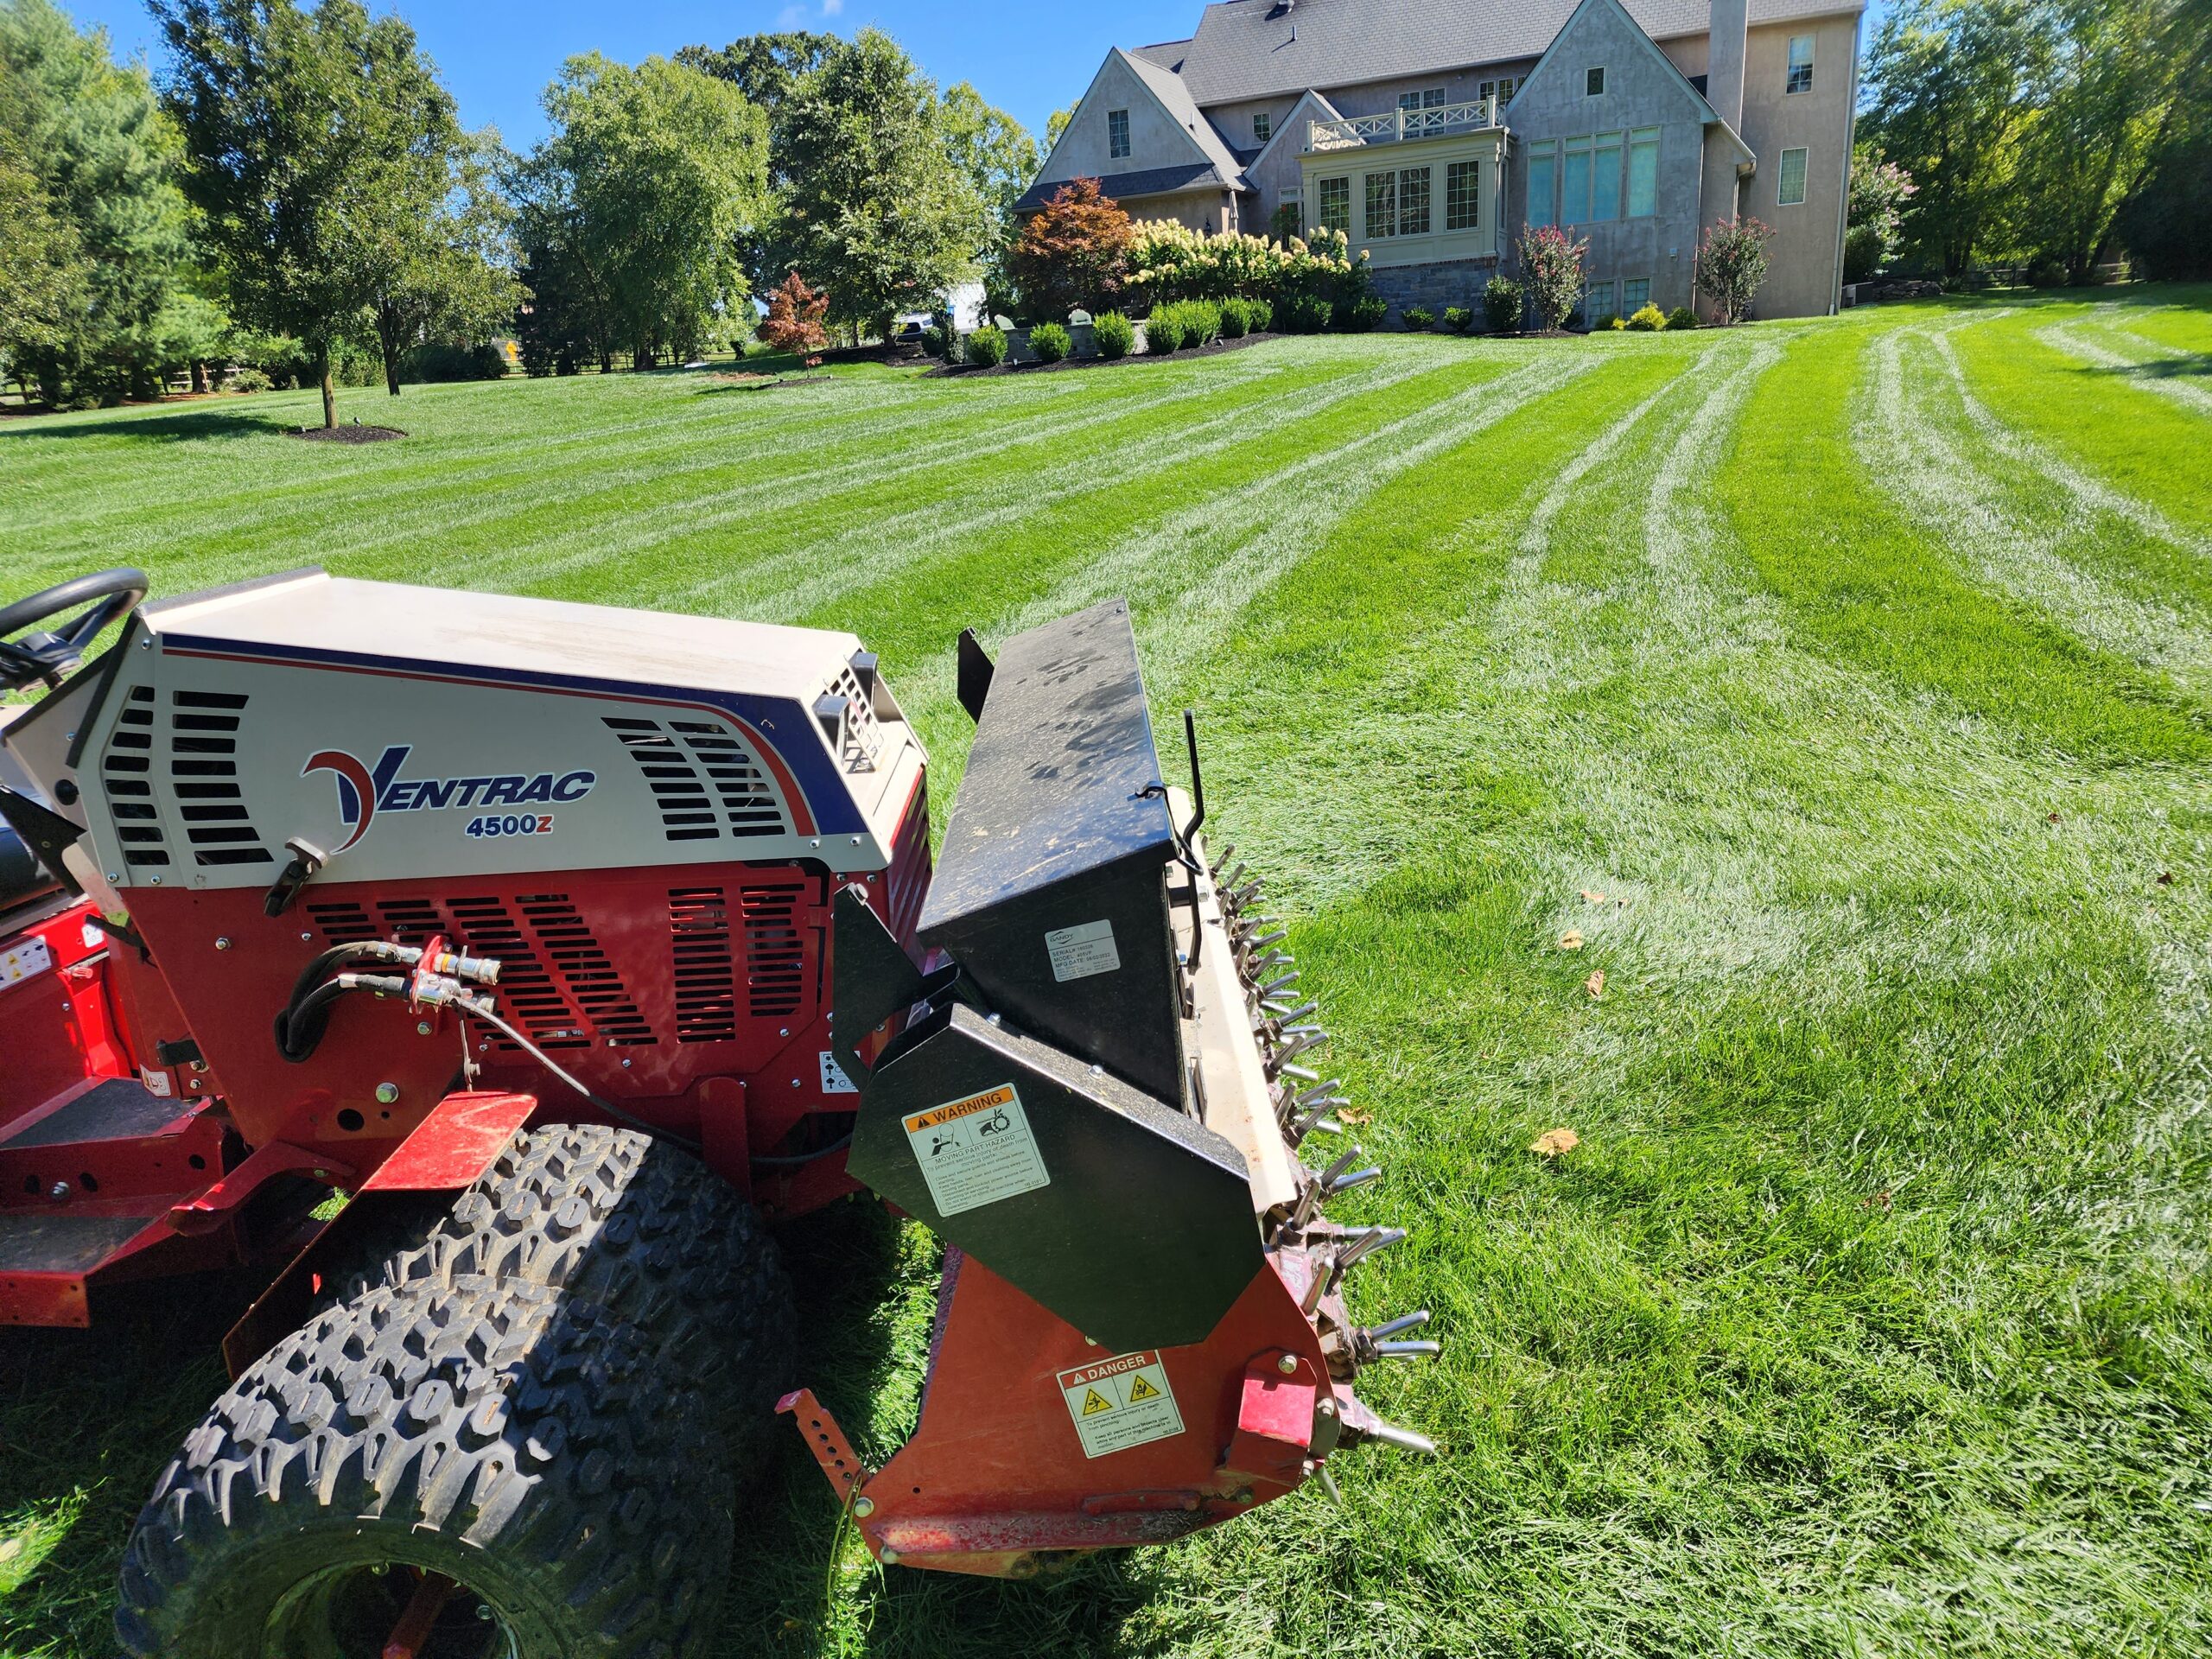 The picture shows a core aerator that DTL Total Turf Care uses for core areations.